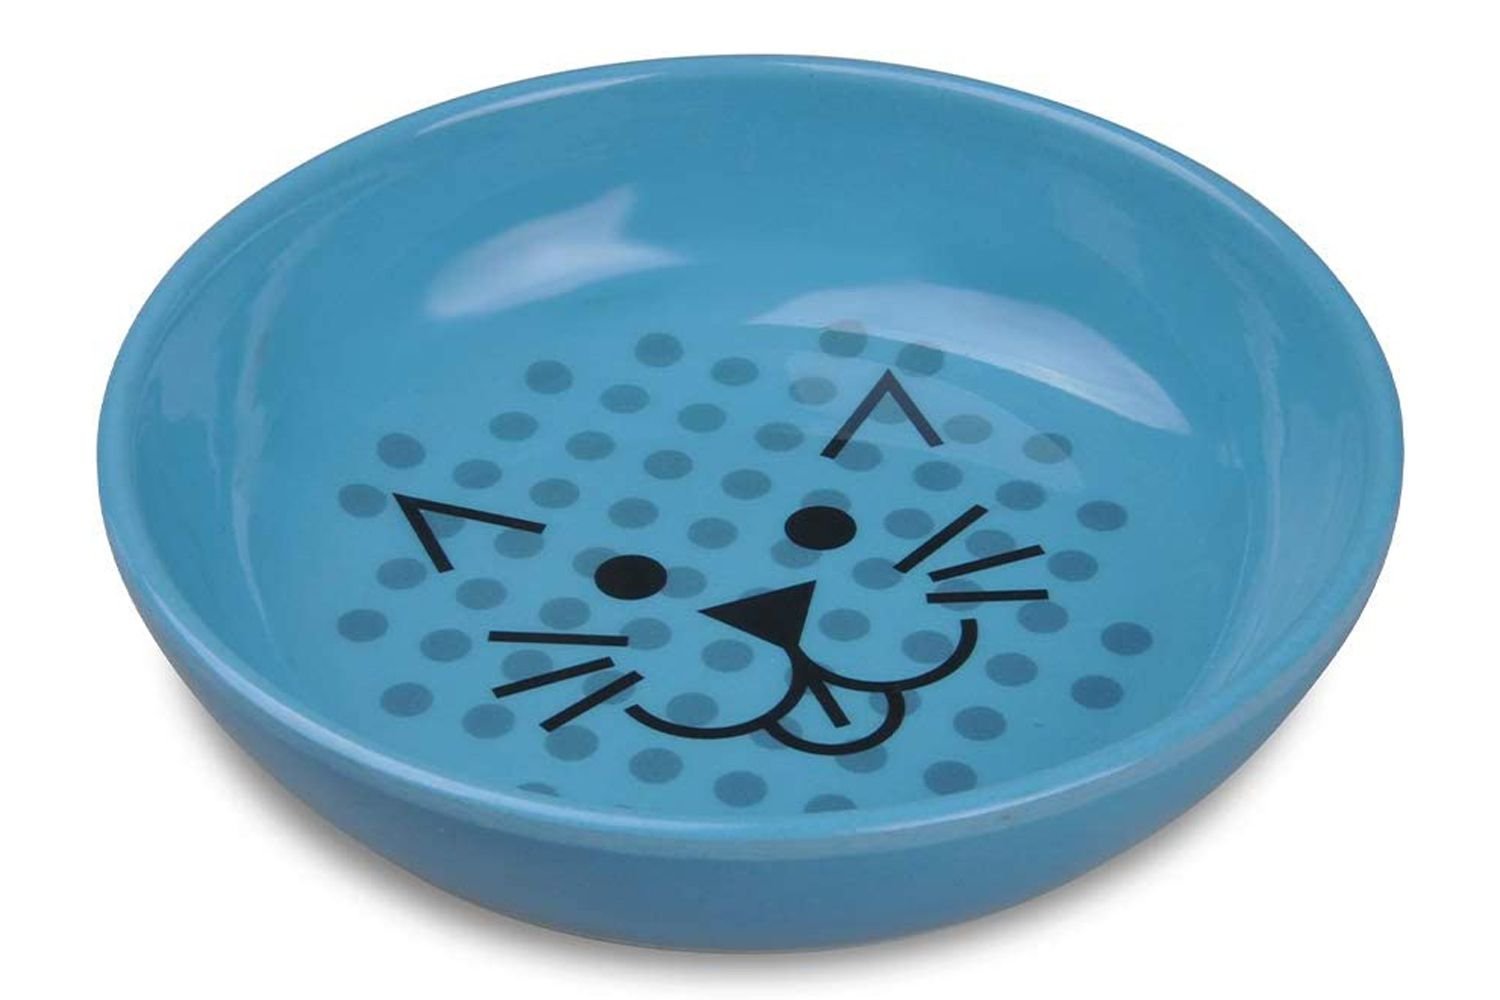 Whisker Fatigue Bowls - An Overview